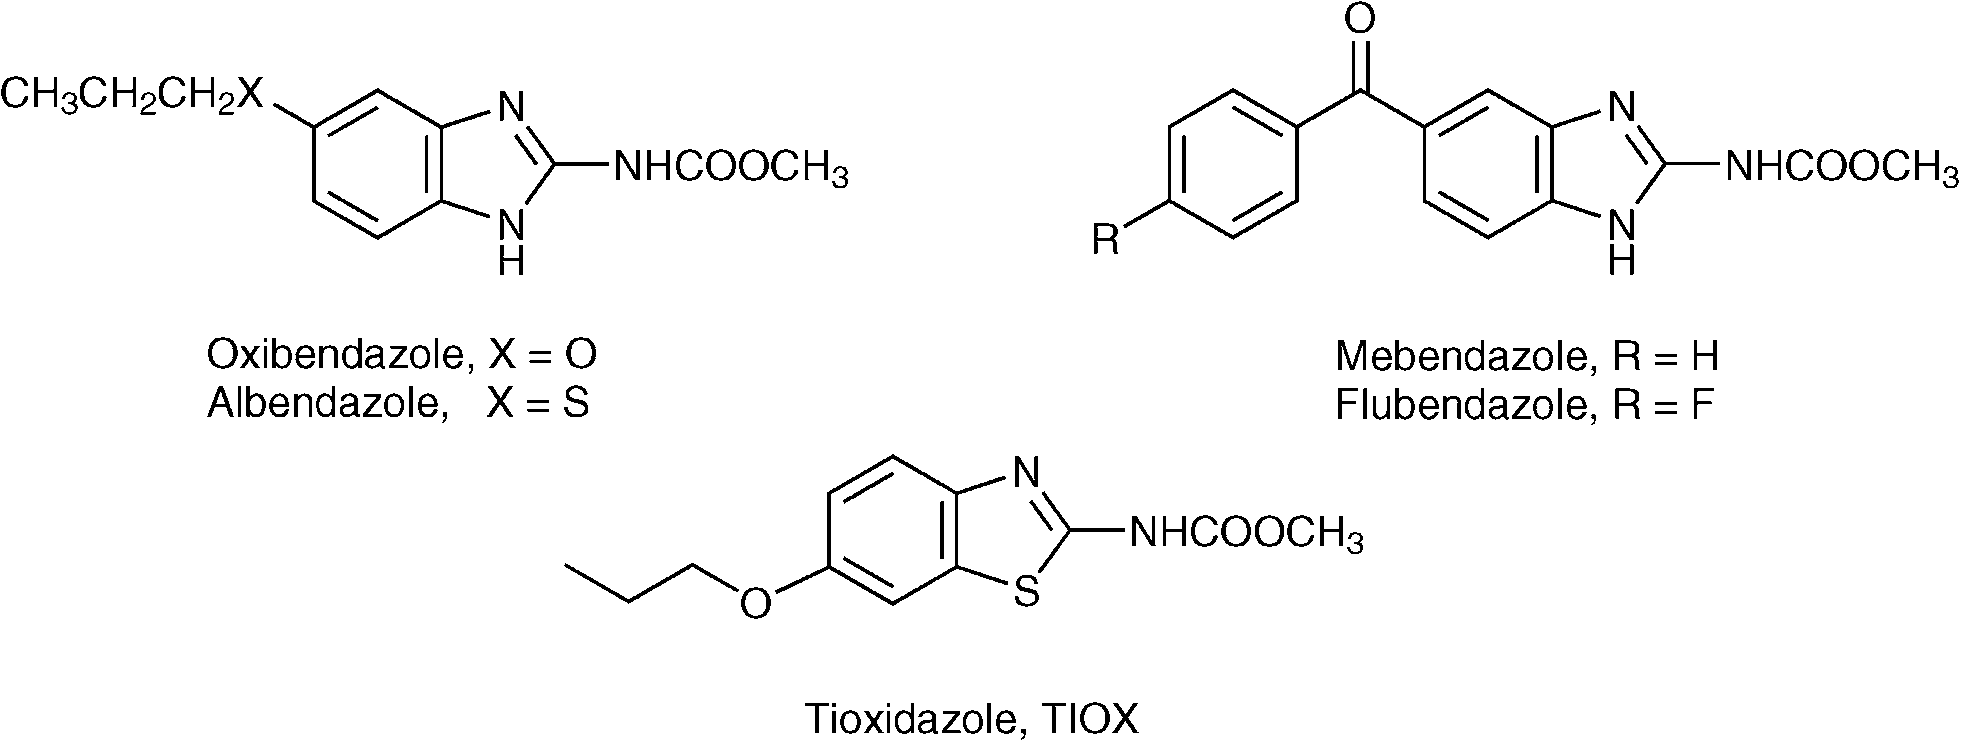 anthelmintic agents synthesis